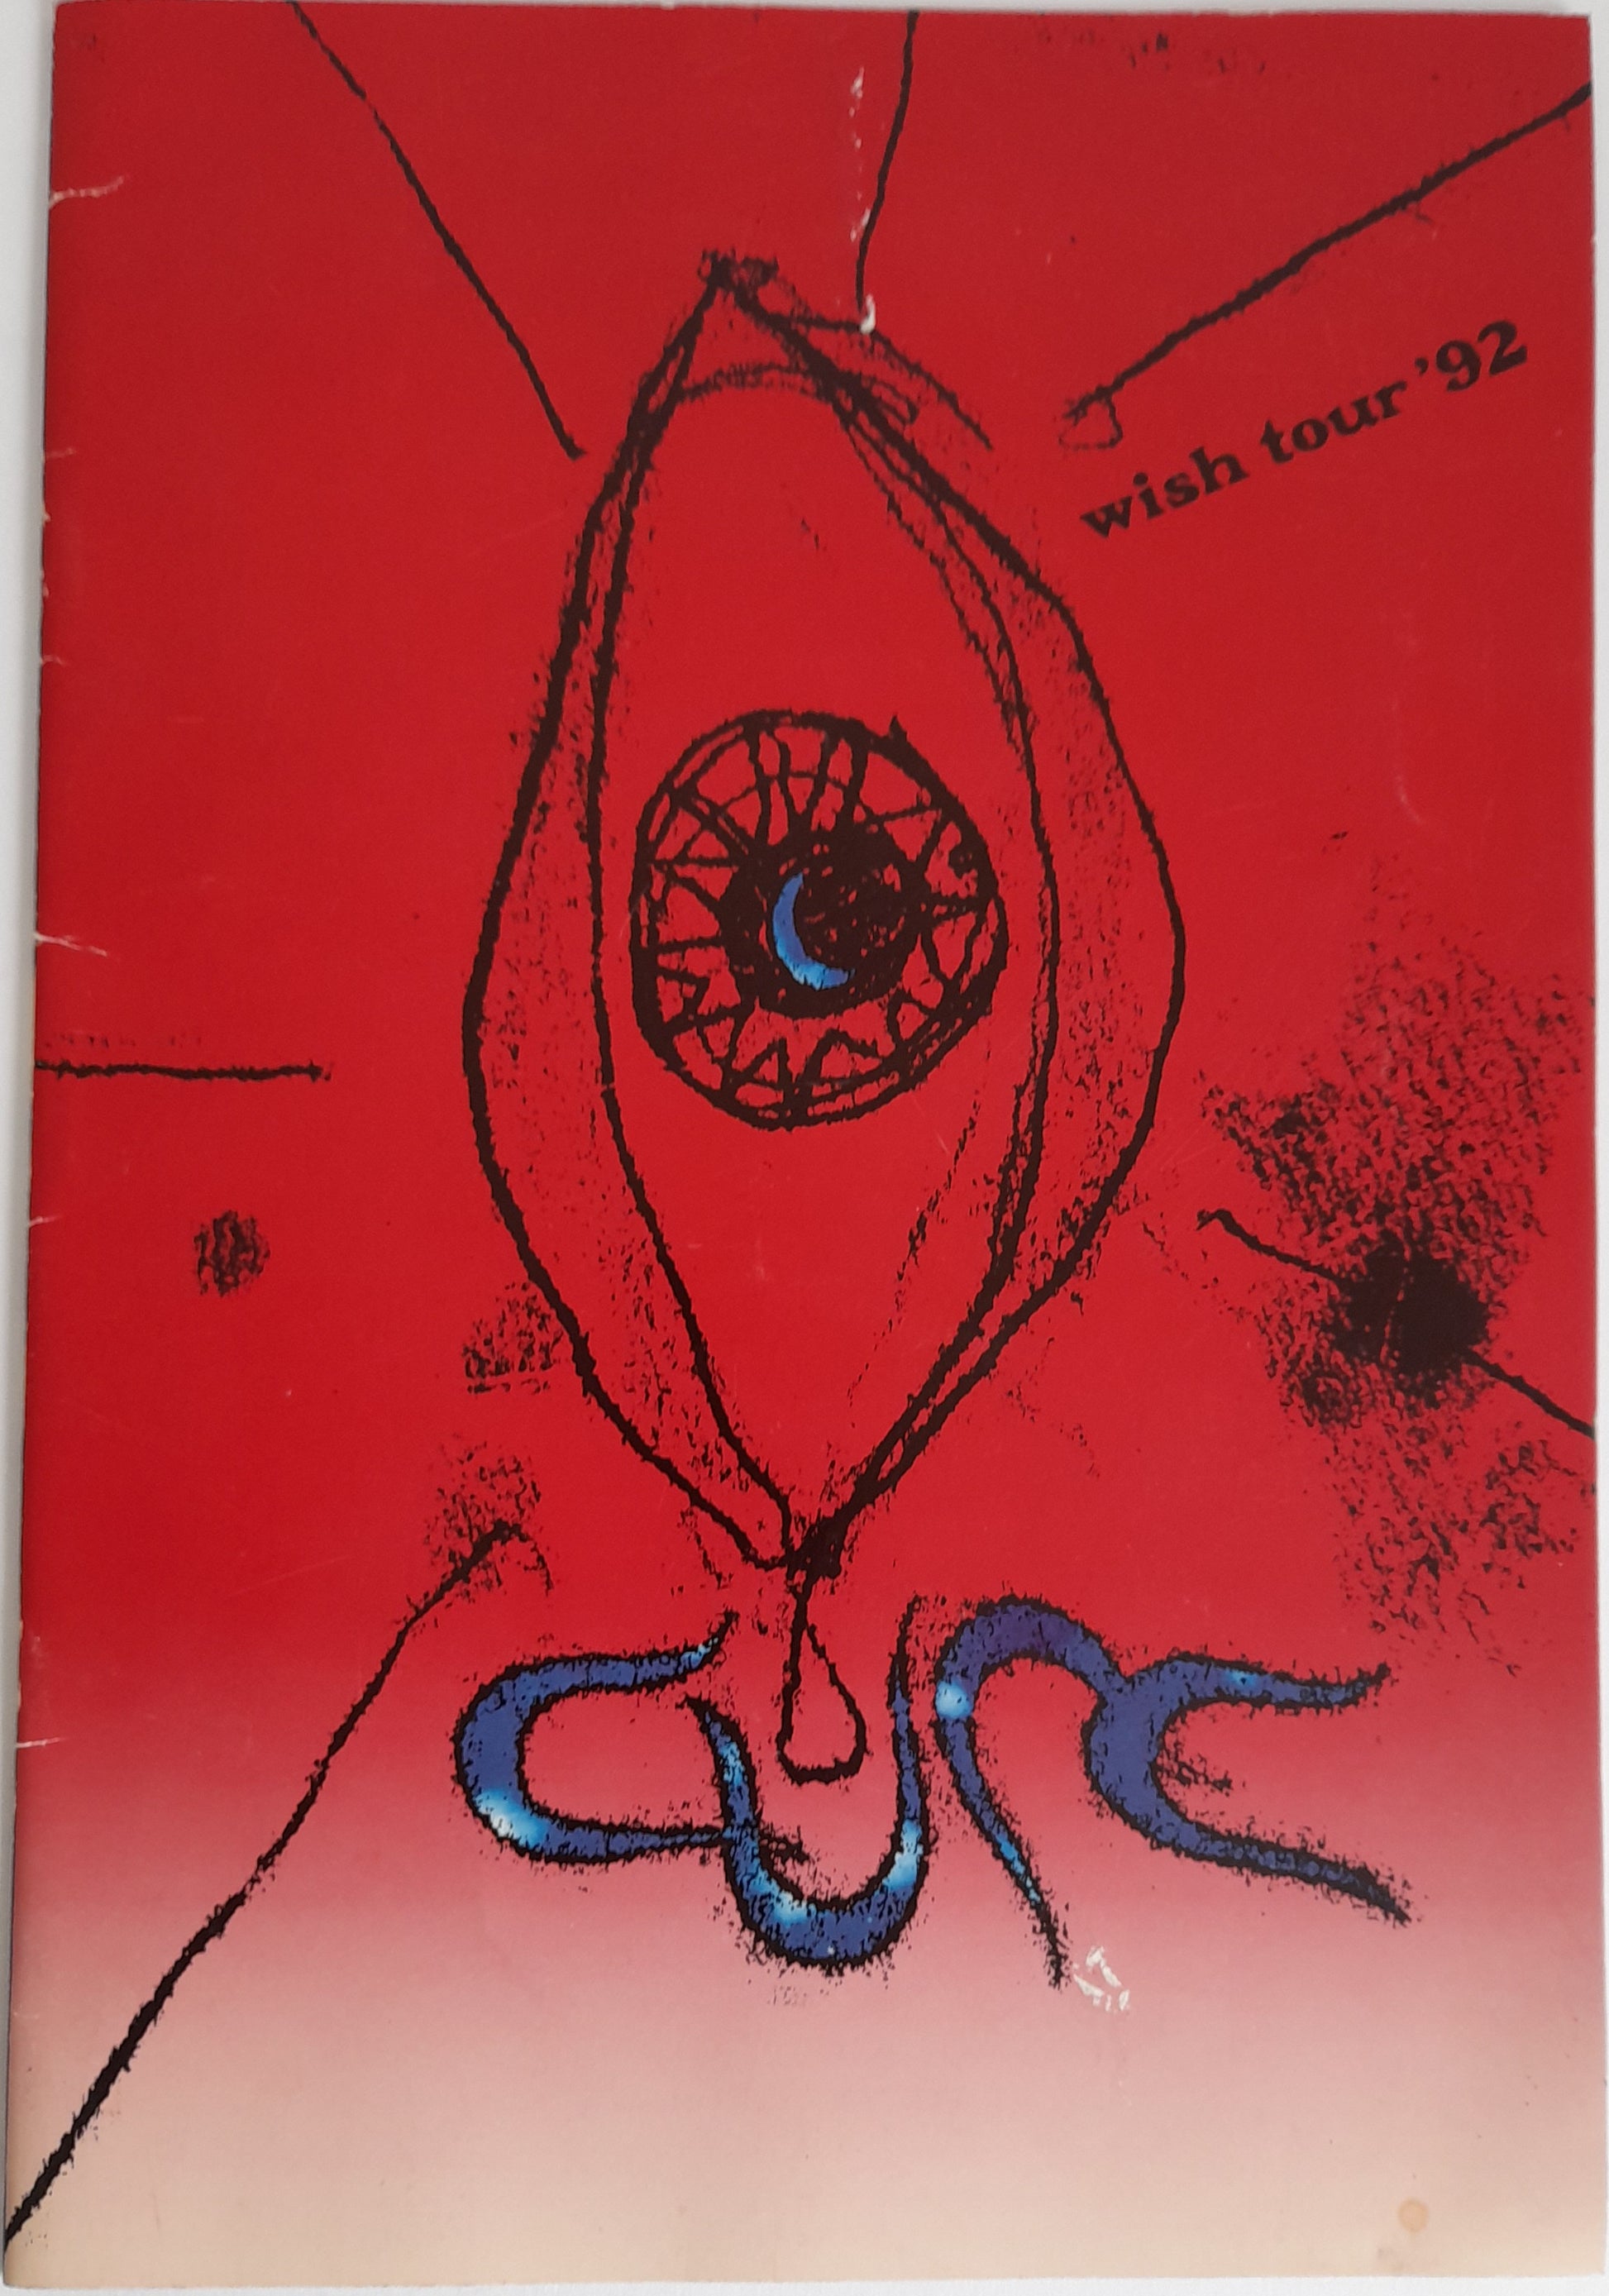 The Cure Wish Tour '92 Programme